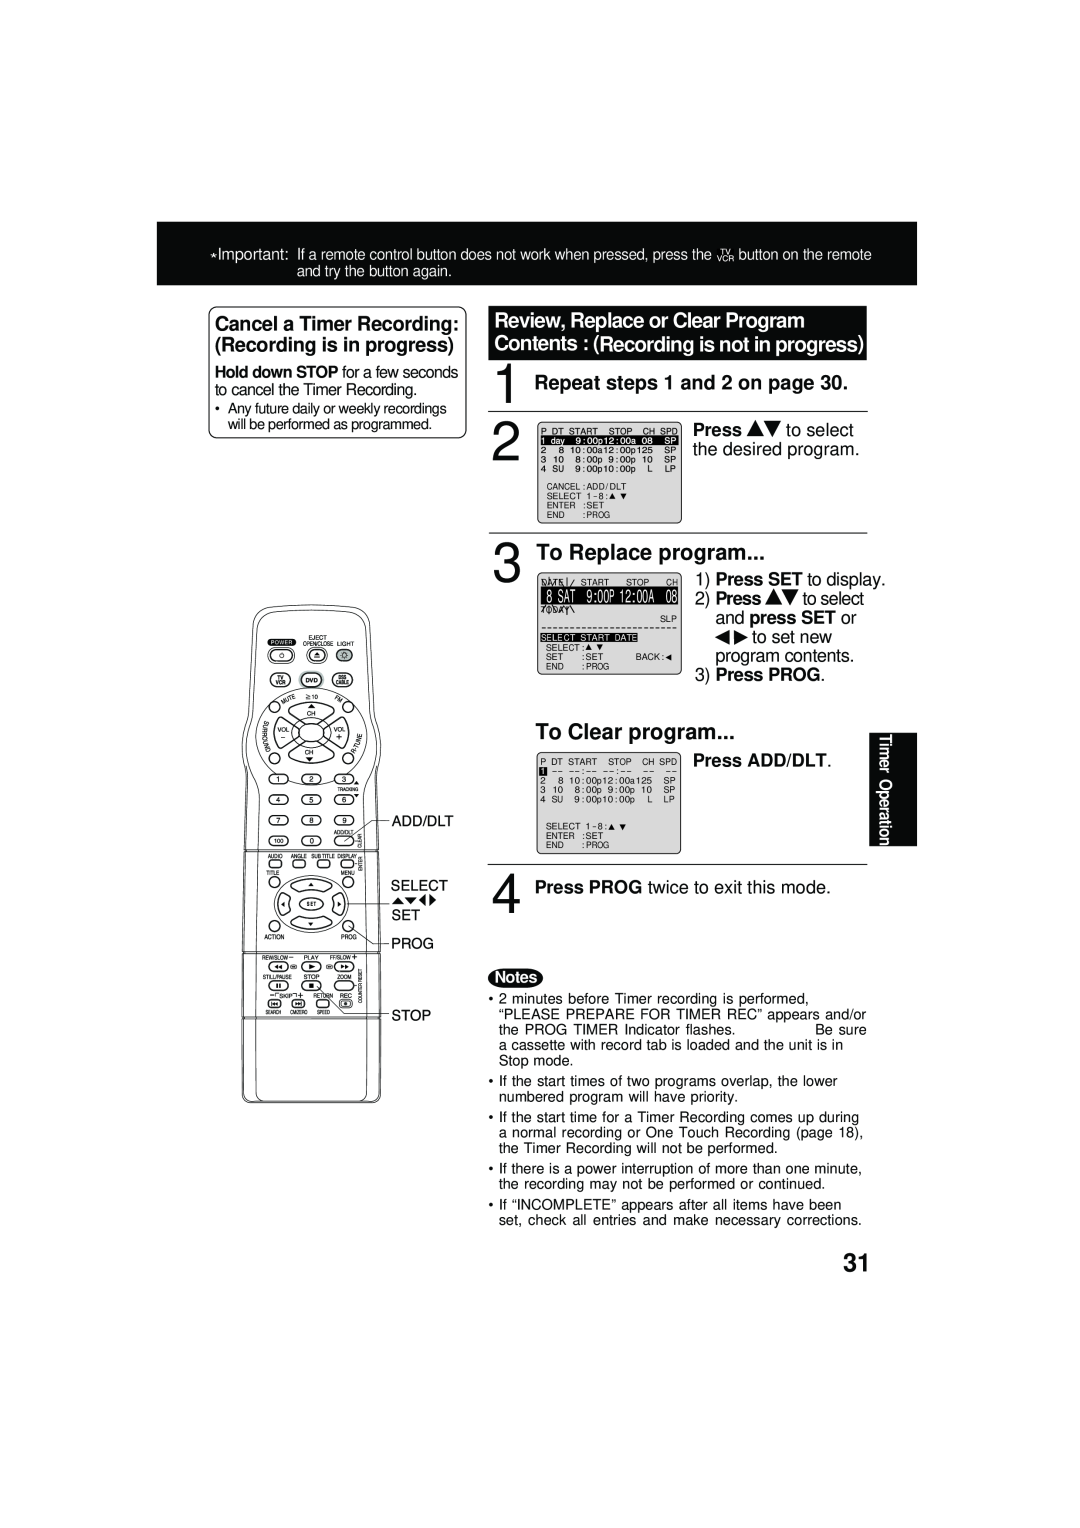 Panasonic PV DM2092 manual To Replace program, To Clear program, Repeat steps 1 and 2 on page, the desired program, Press 